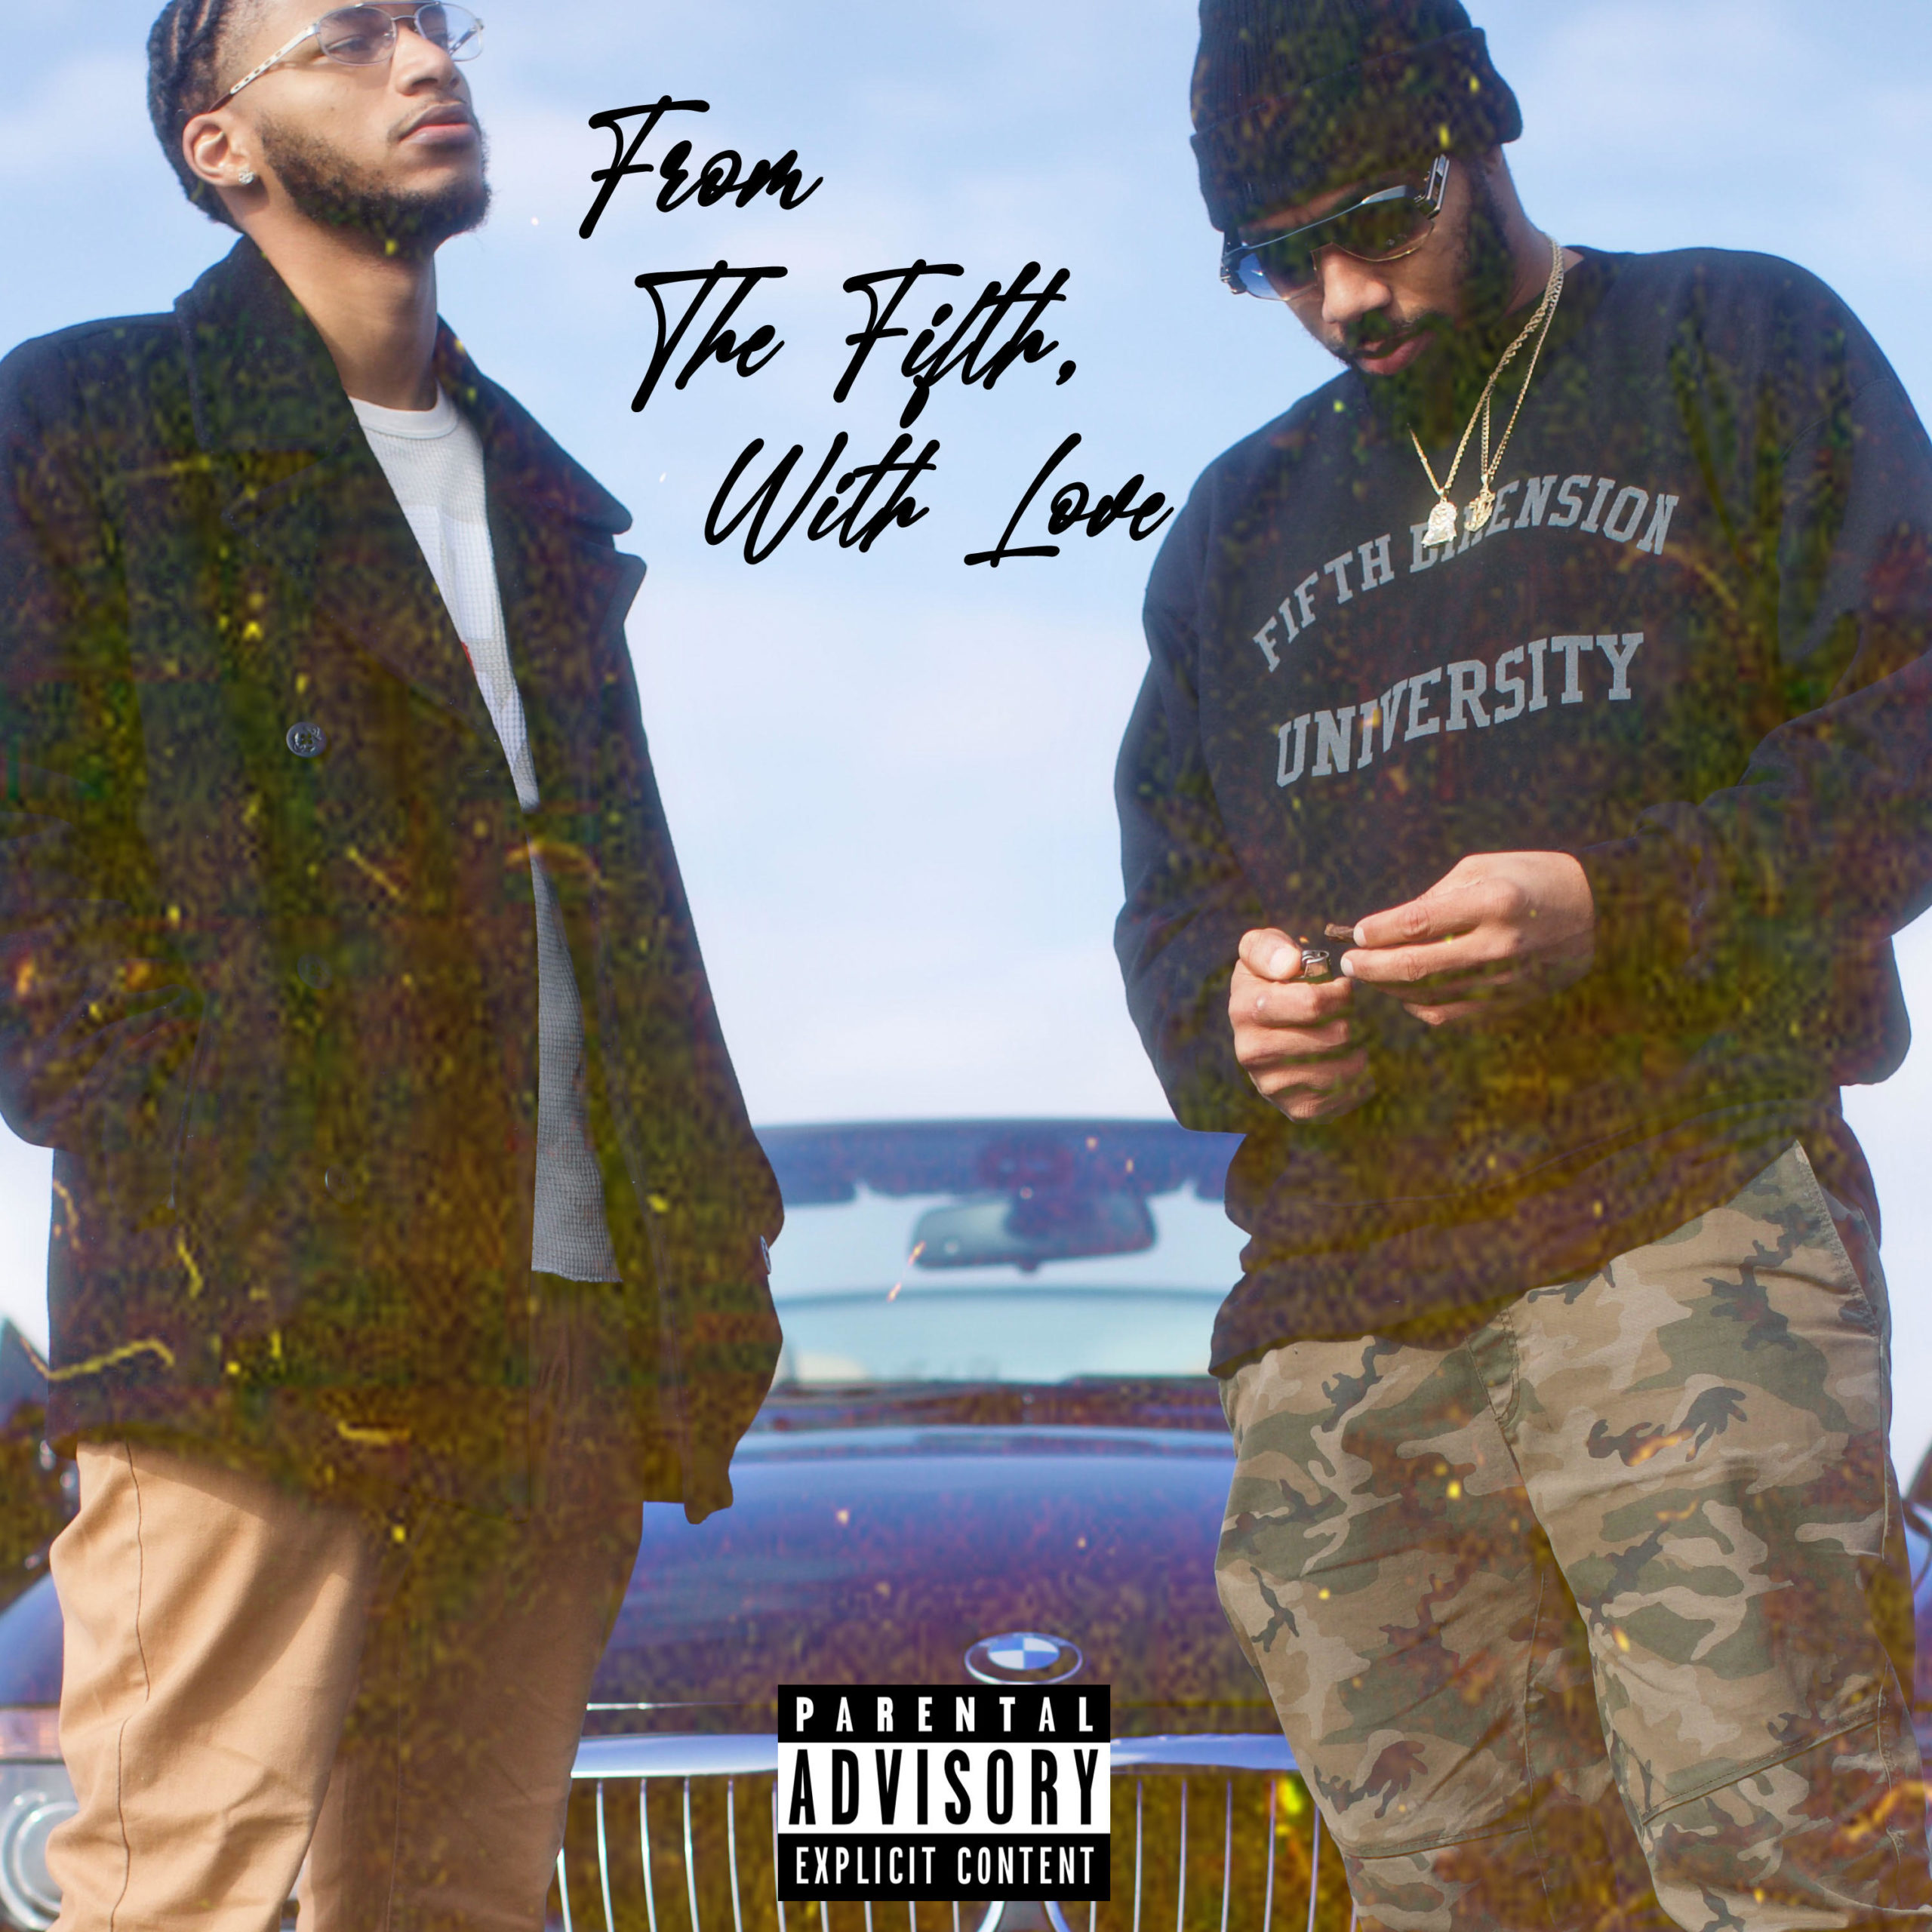 Virginia Representers, Jenks & Childz have teamed up for their new  EP dubbed “From The Fifth With Love”